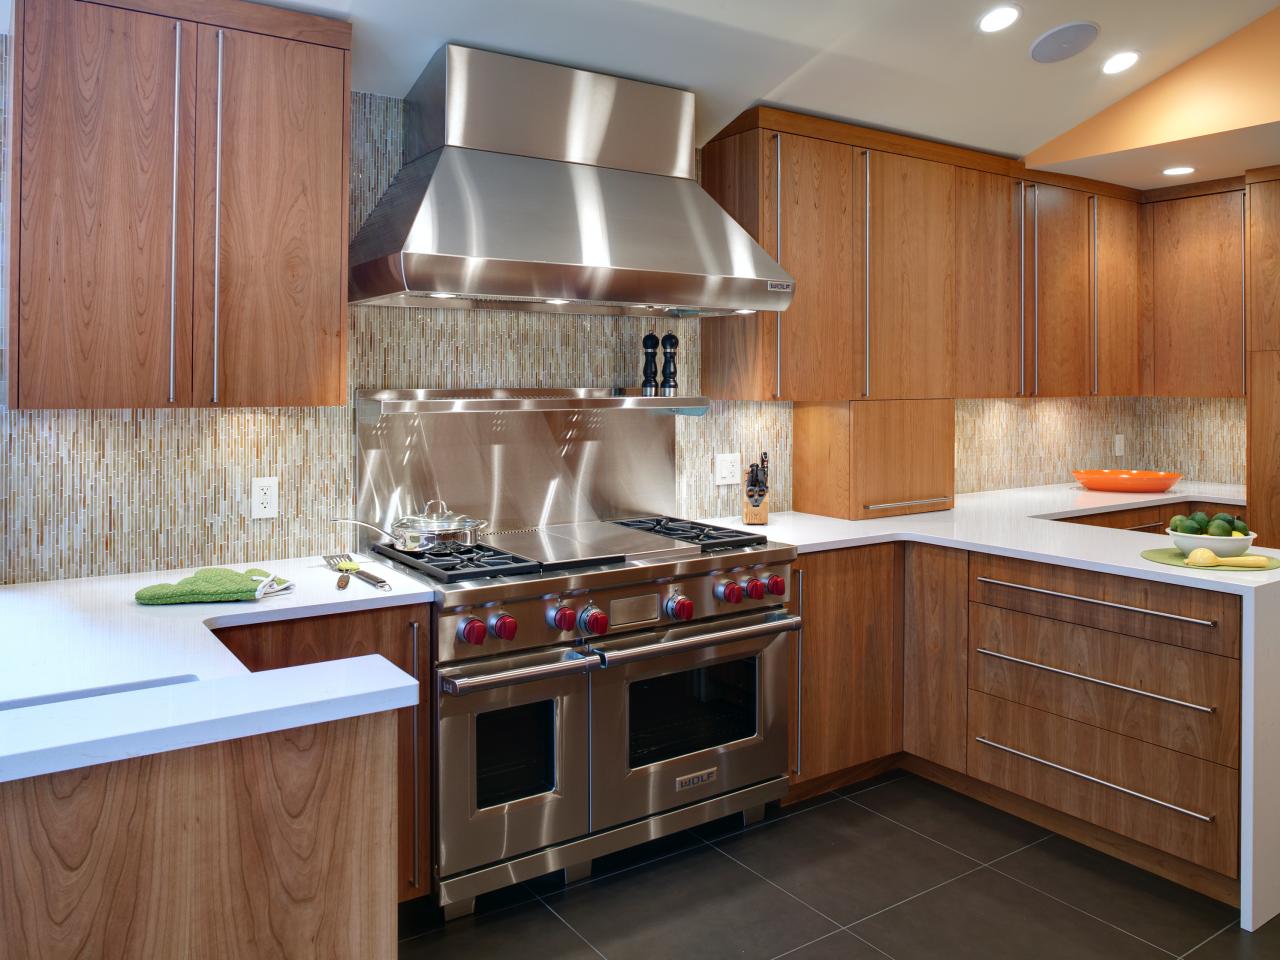 Refinishing Kitchen Cabinet Ideas: Pictures & Tips From ...